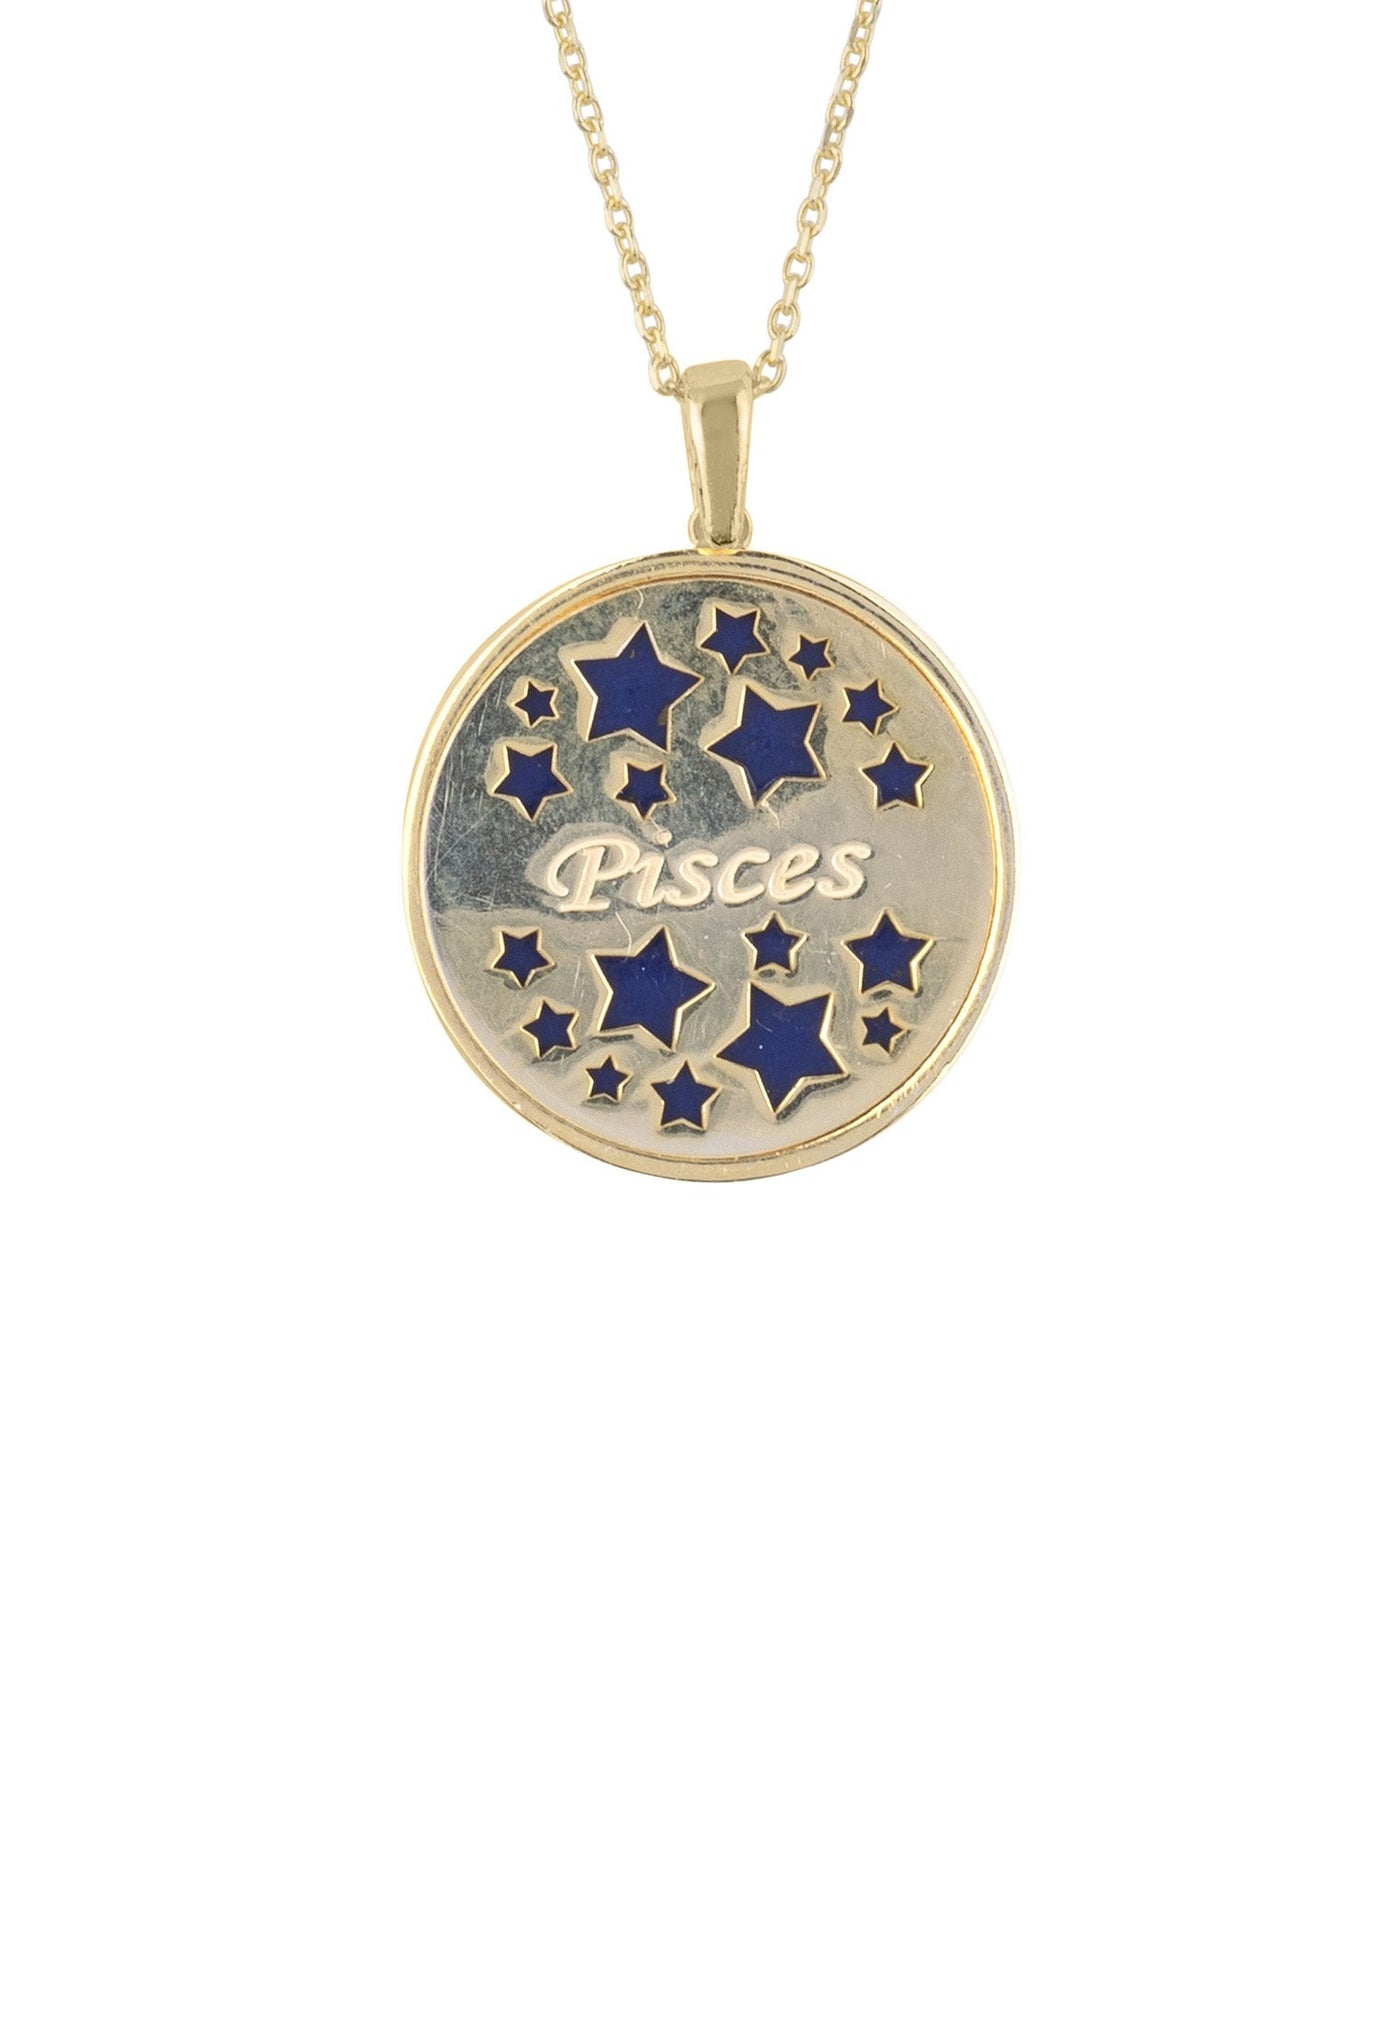 Pisces - necklace - 22 carat gold plated - lapis lazuli with white zirconia